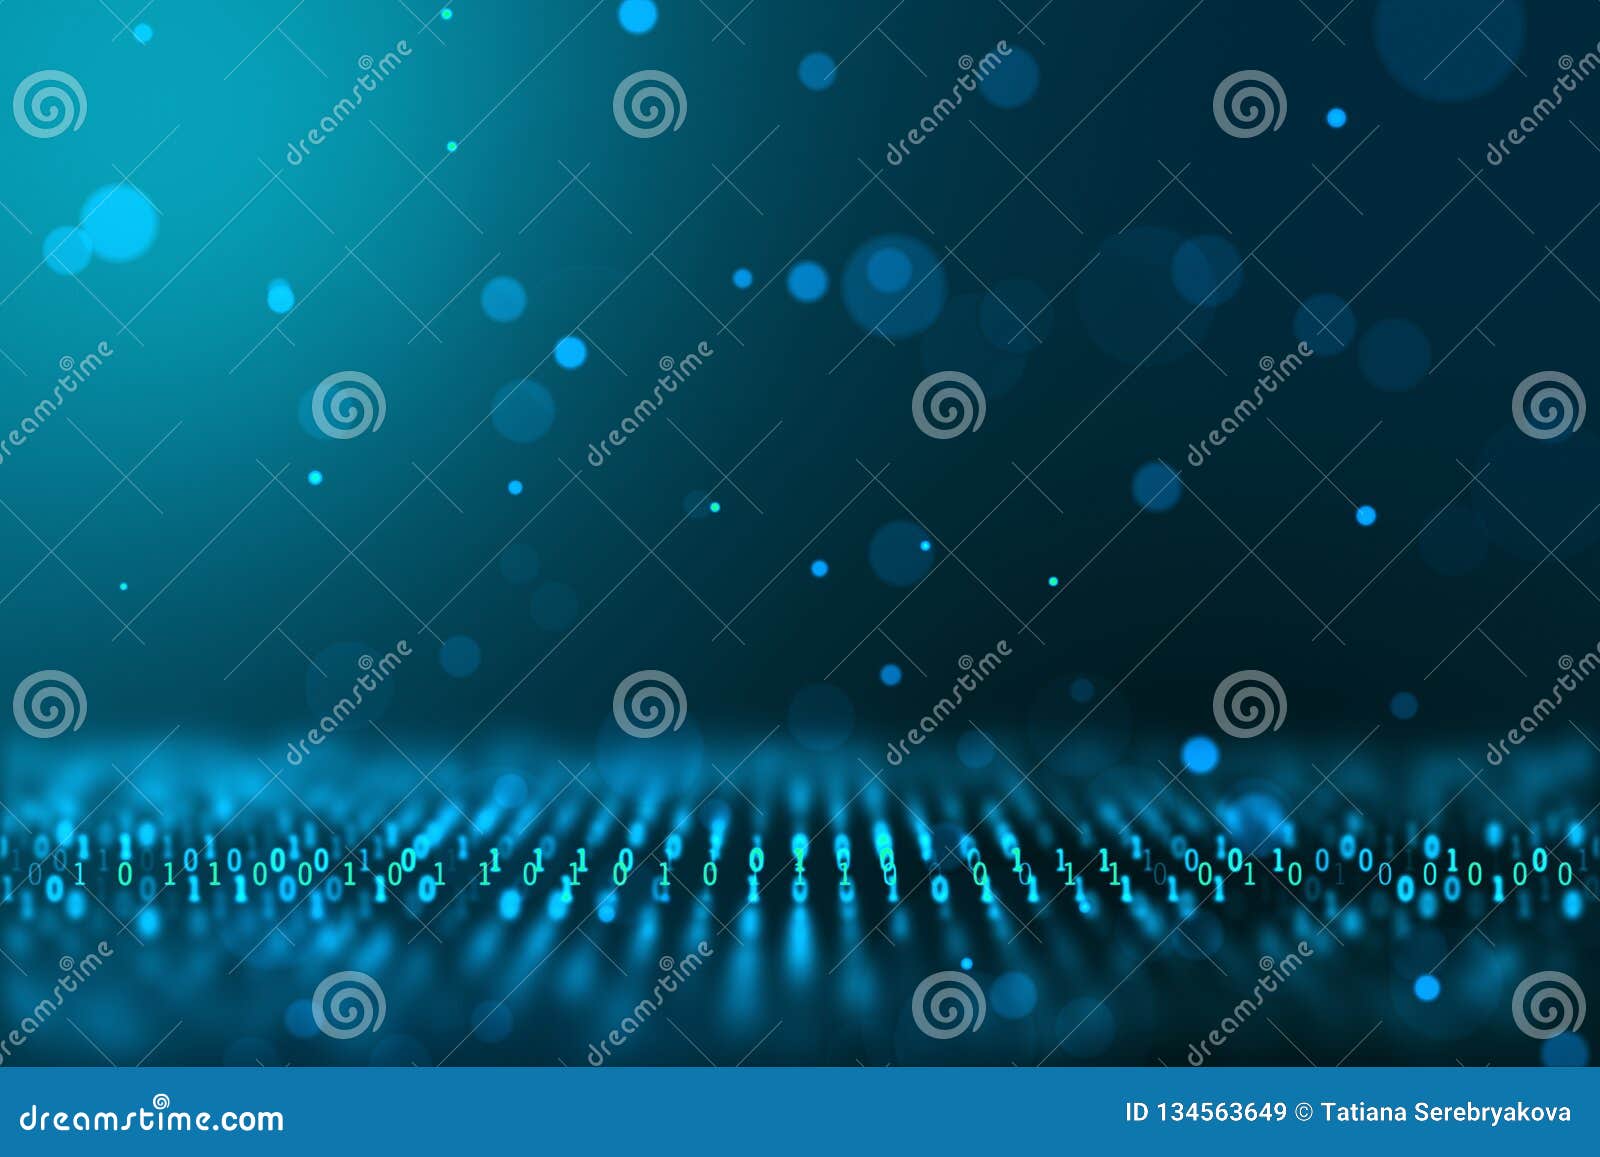 digital information technology binary world concept computer generated background